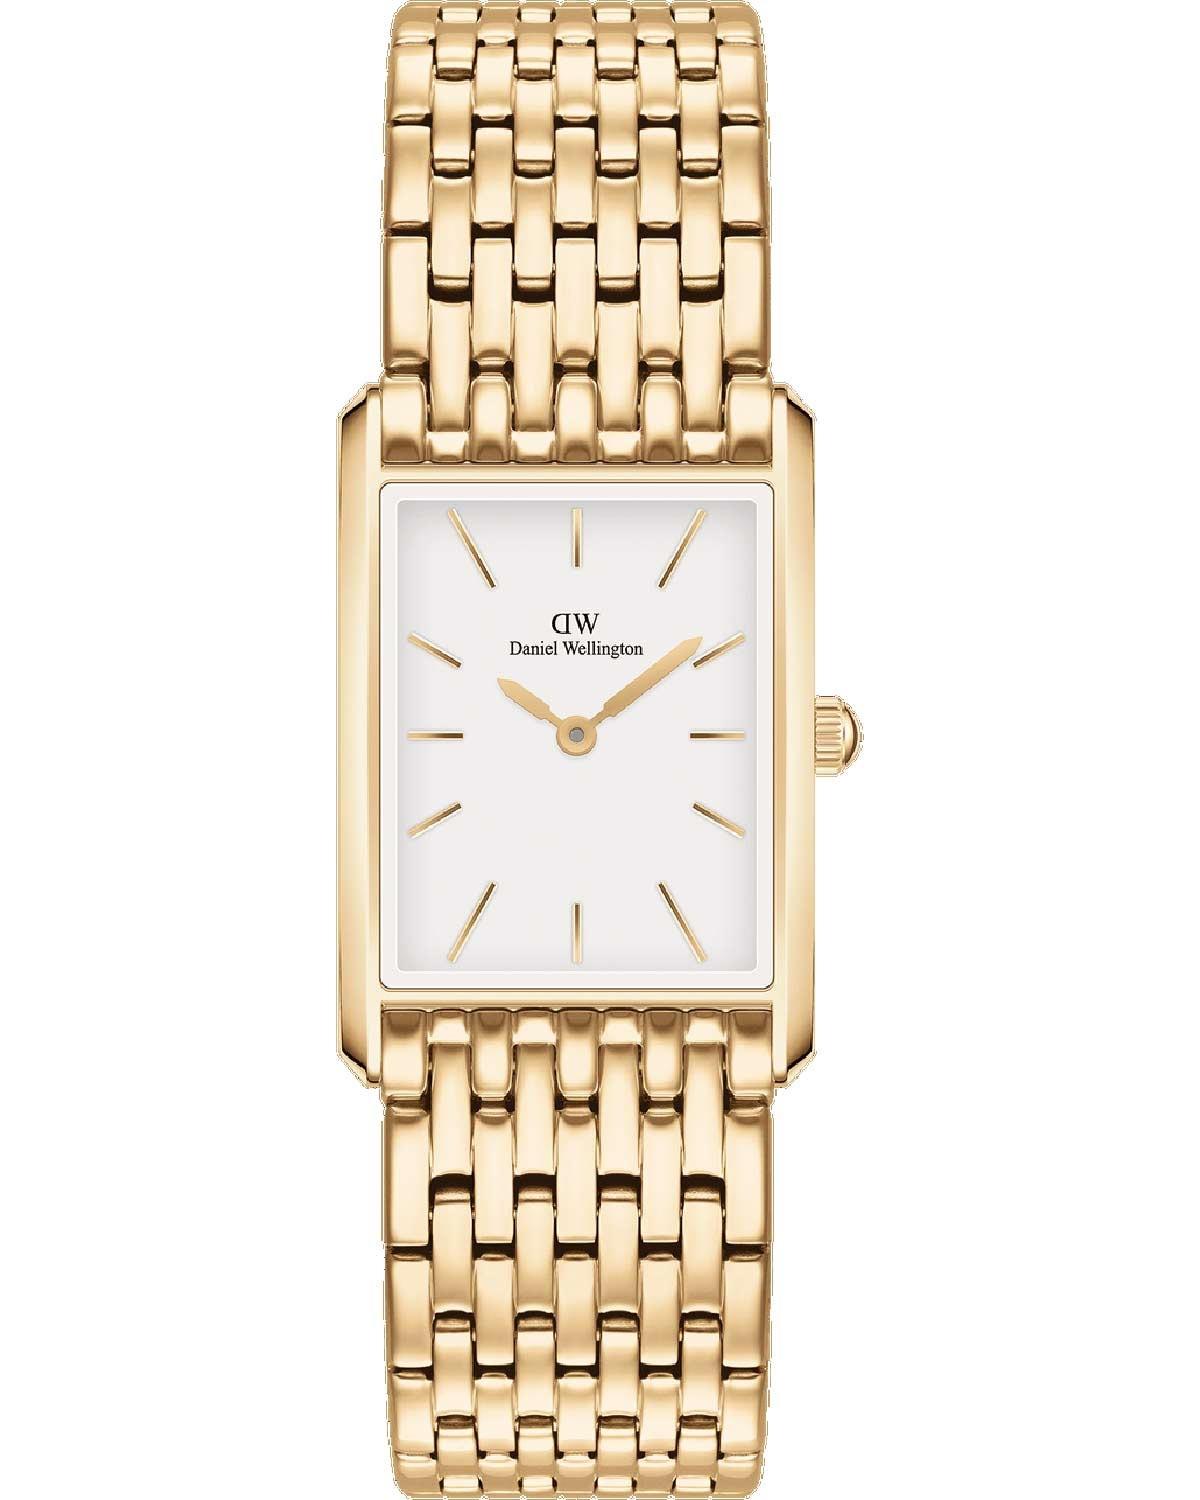 DANIEL WELLINGTON Bound 9-Link Gold - DW00100705, Gold case with Stainless Steel Bracelet